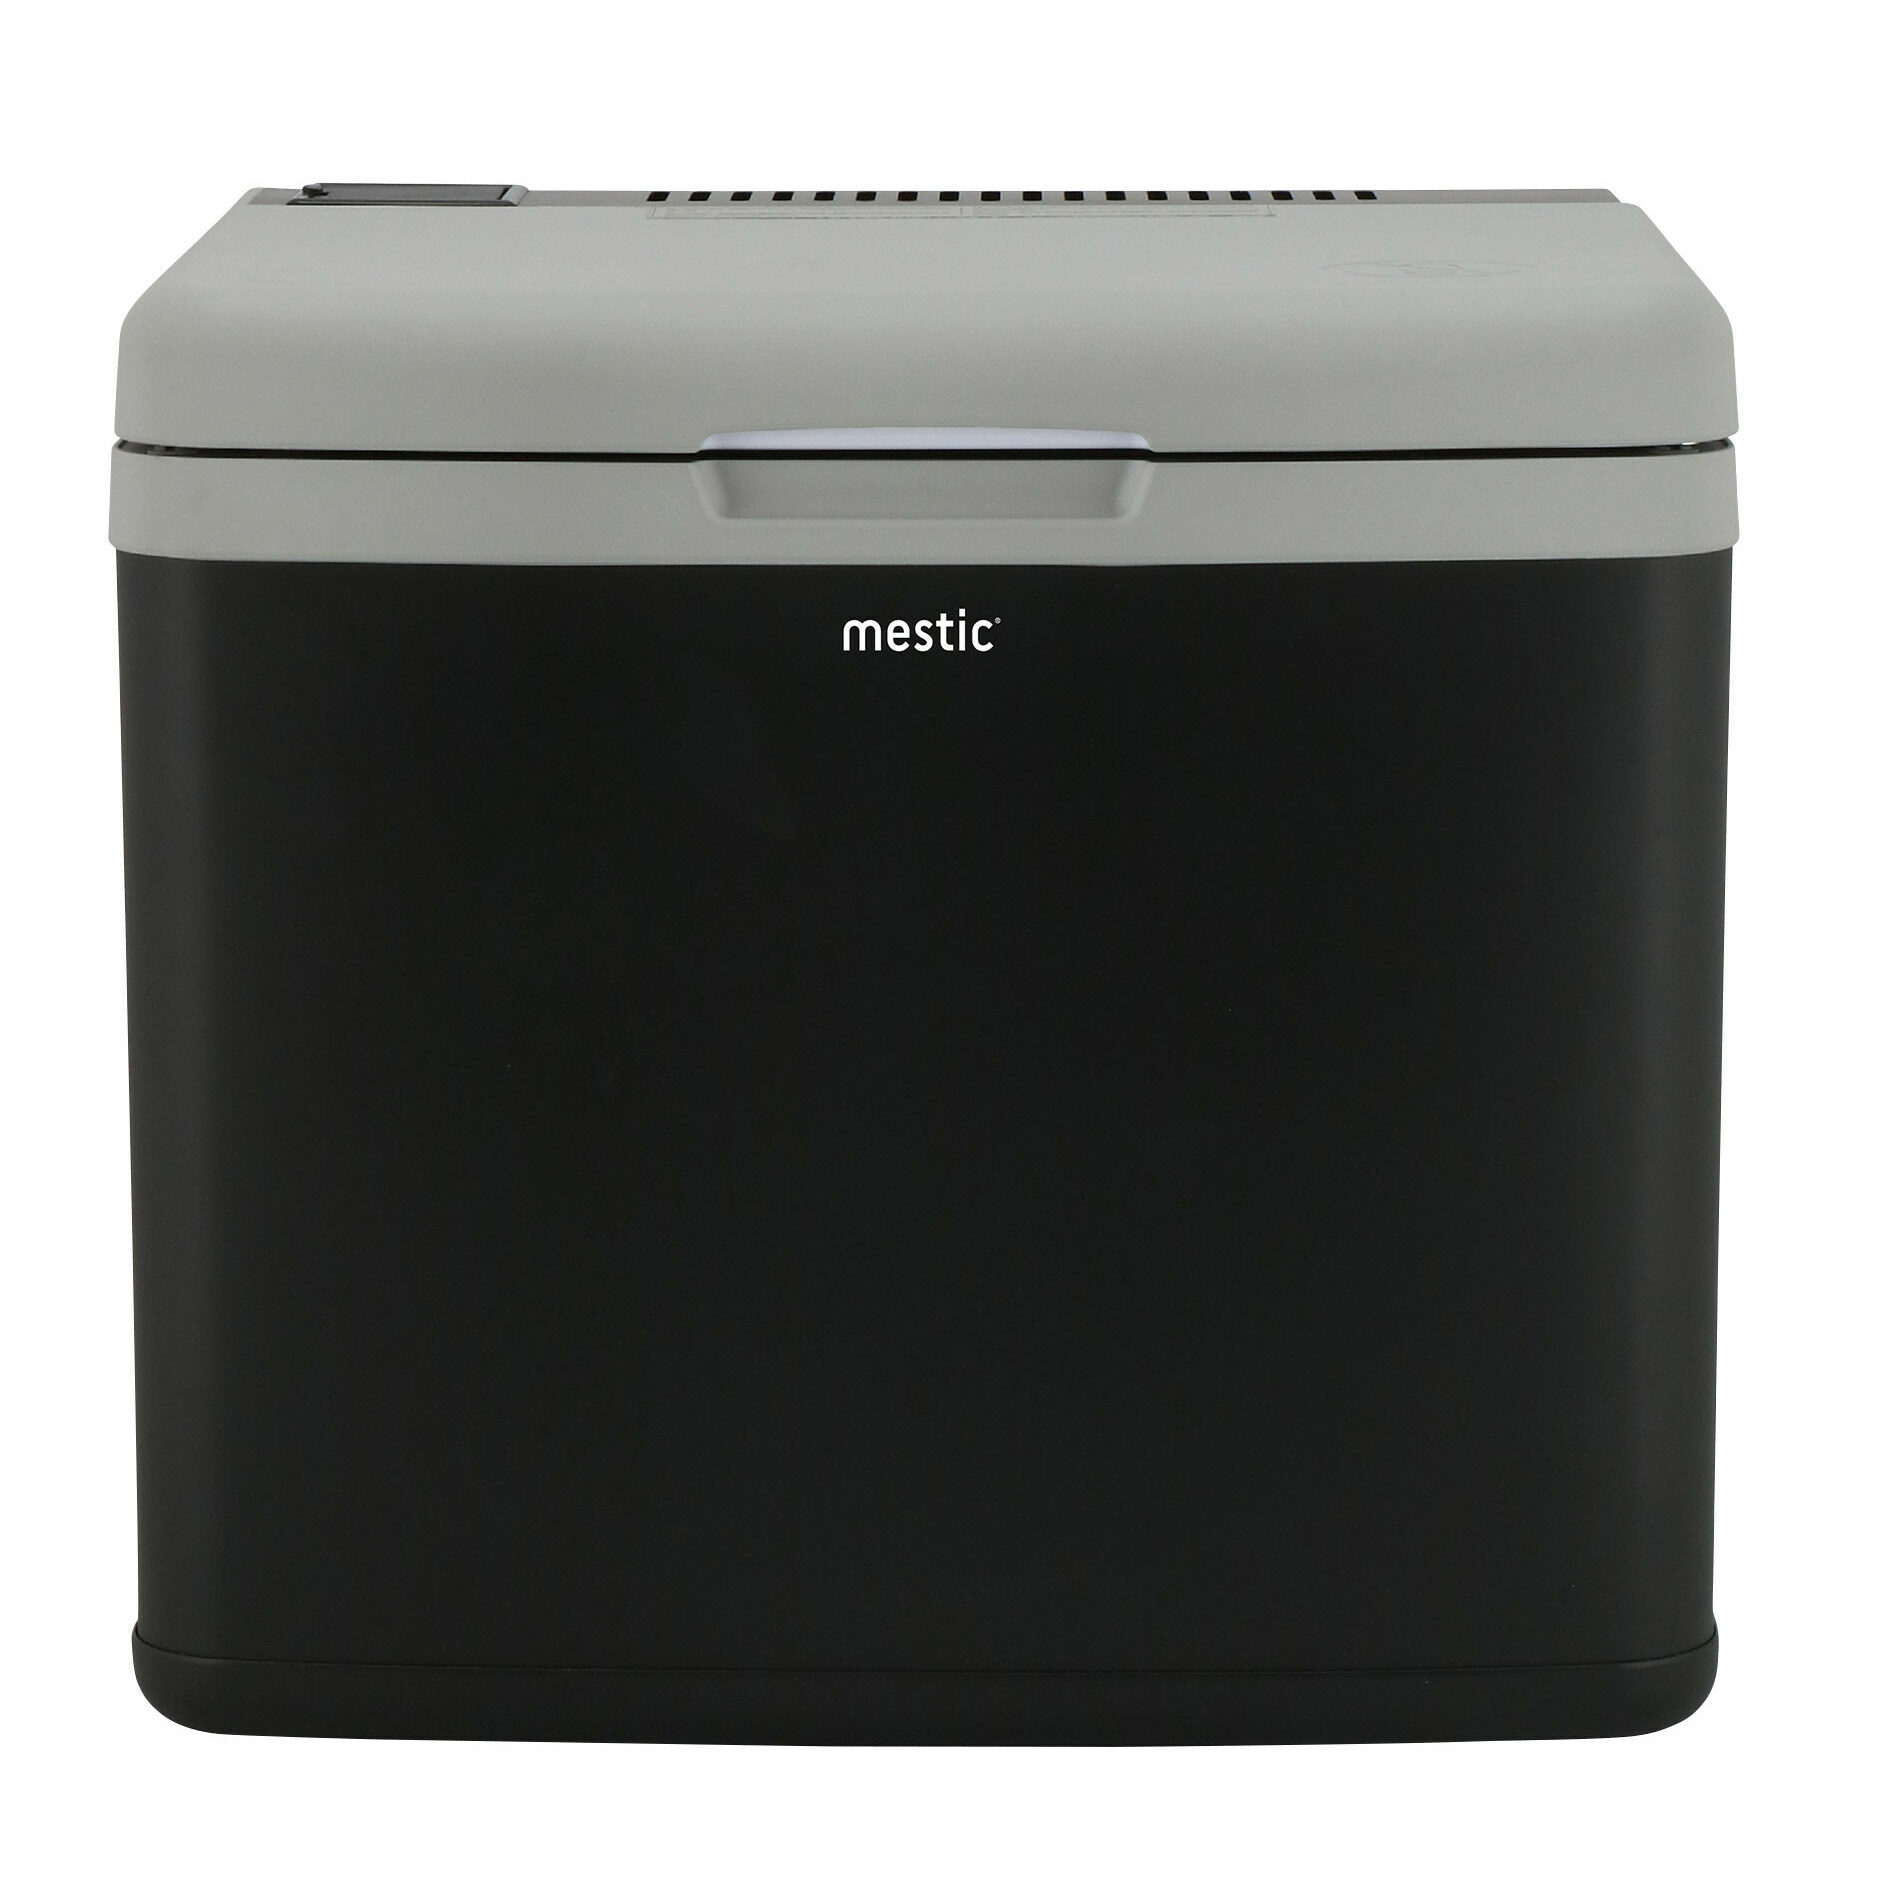 Mestic Portable Absorption Cooler